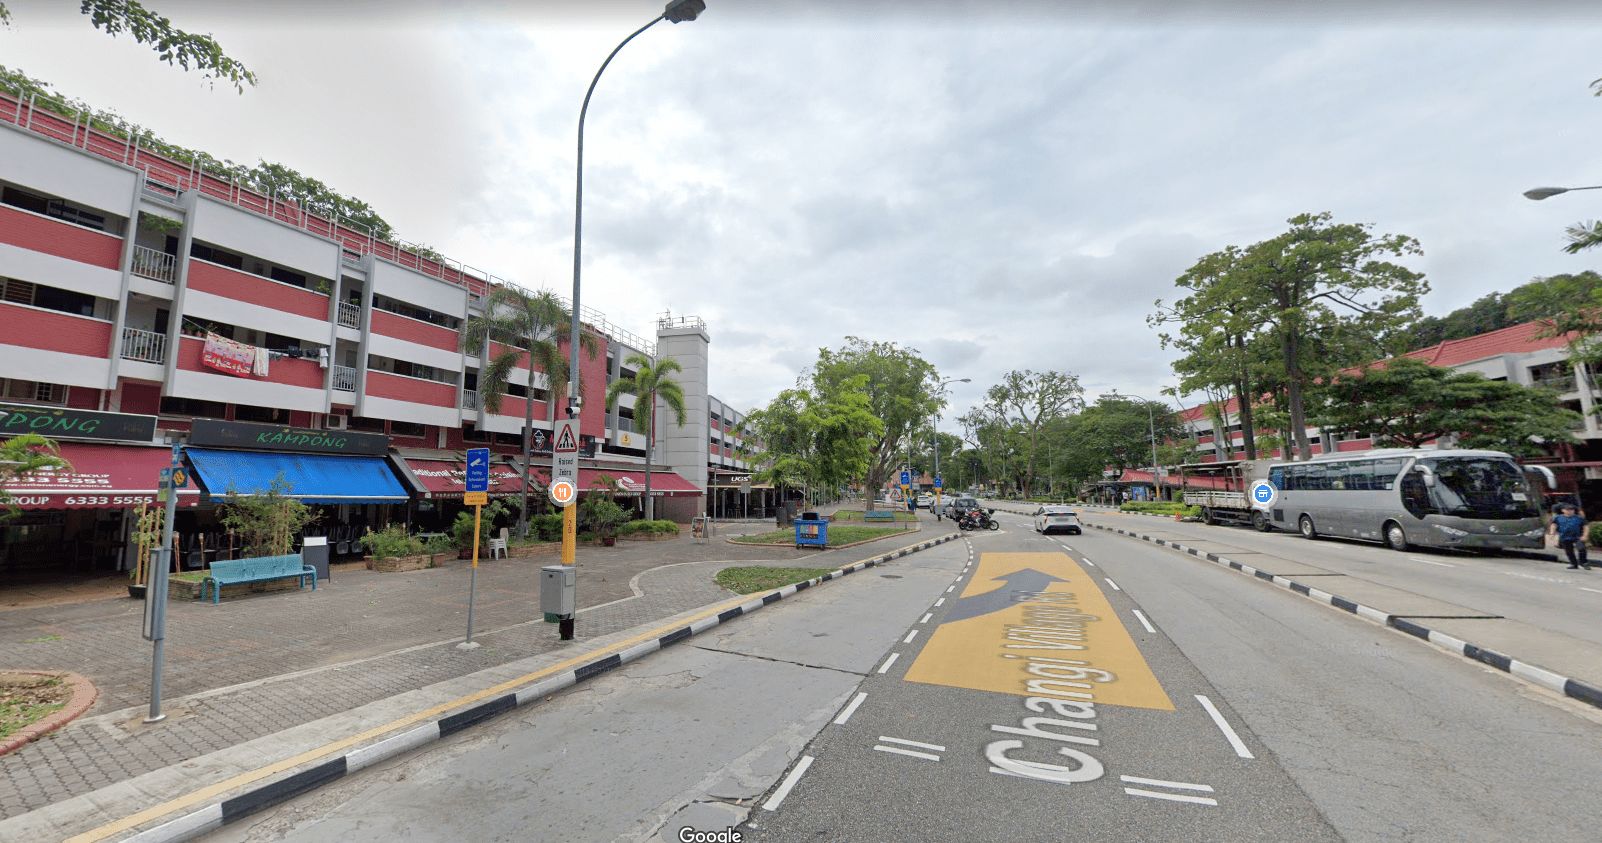 bus 29 takes you along old shophouses at changi village - Scenic bus routes in Singapore